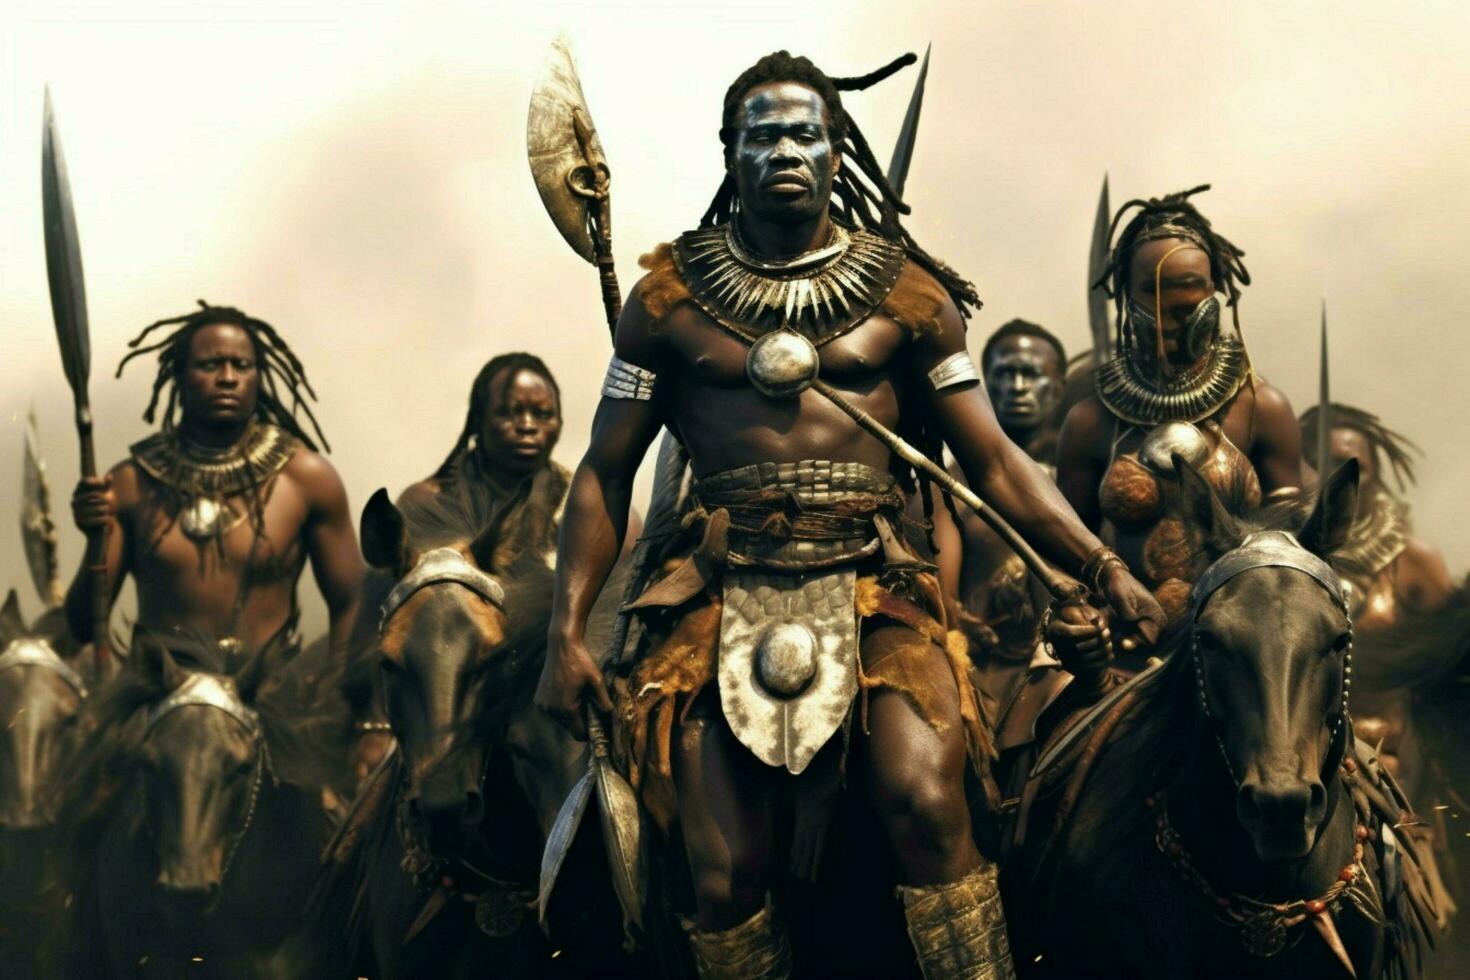 The bravery and courage of African warriors photo